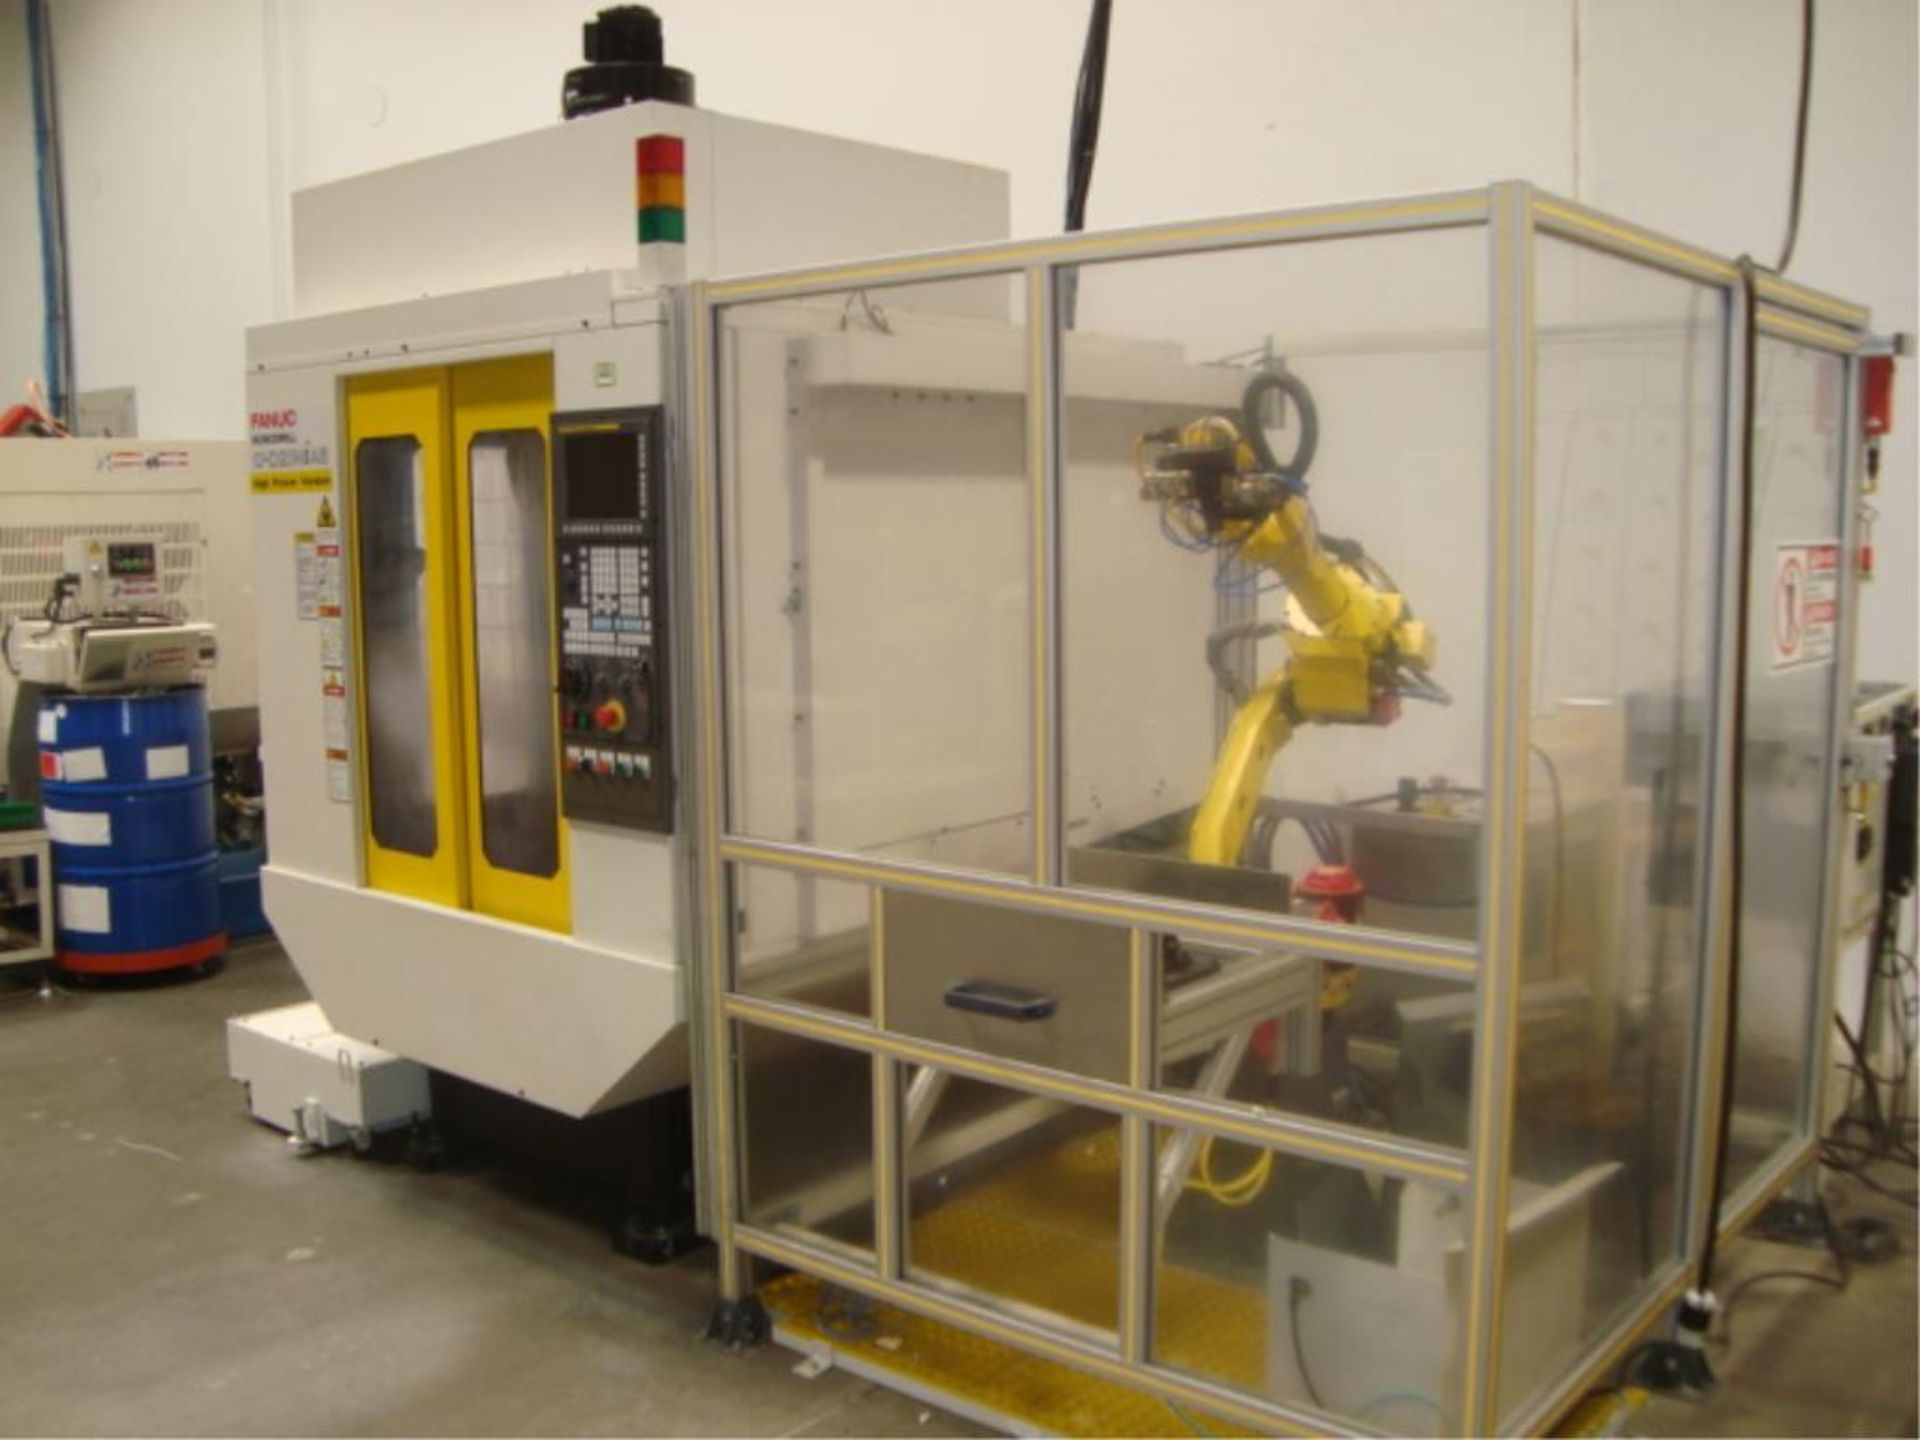 Fanuc Robodrill Alpha-D21MiA5 with Fanuc M-10iA 6-Axis Robot - Image 6 of 60